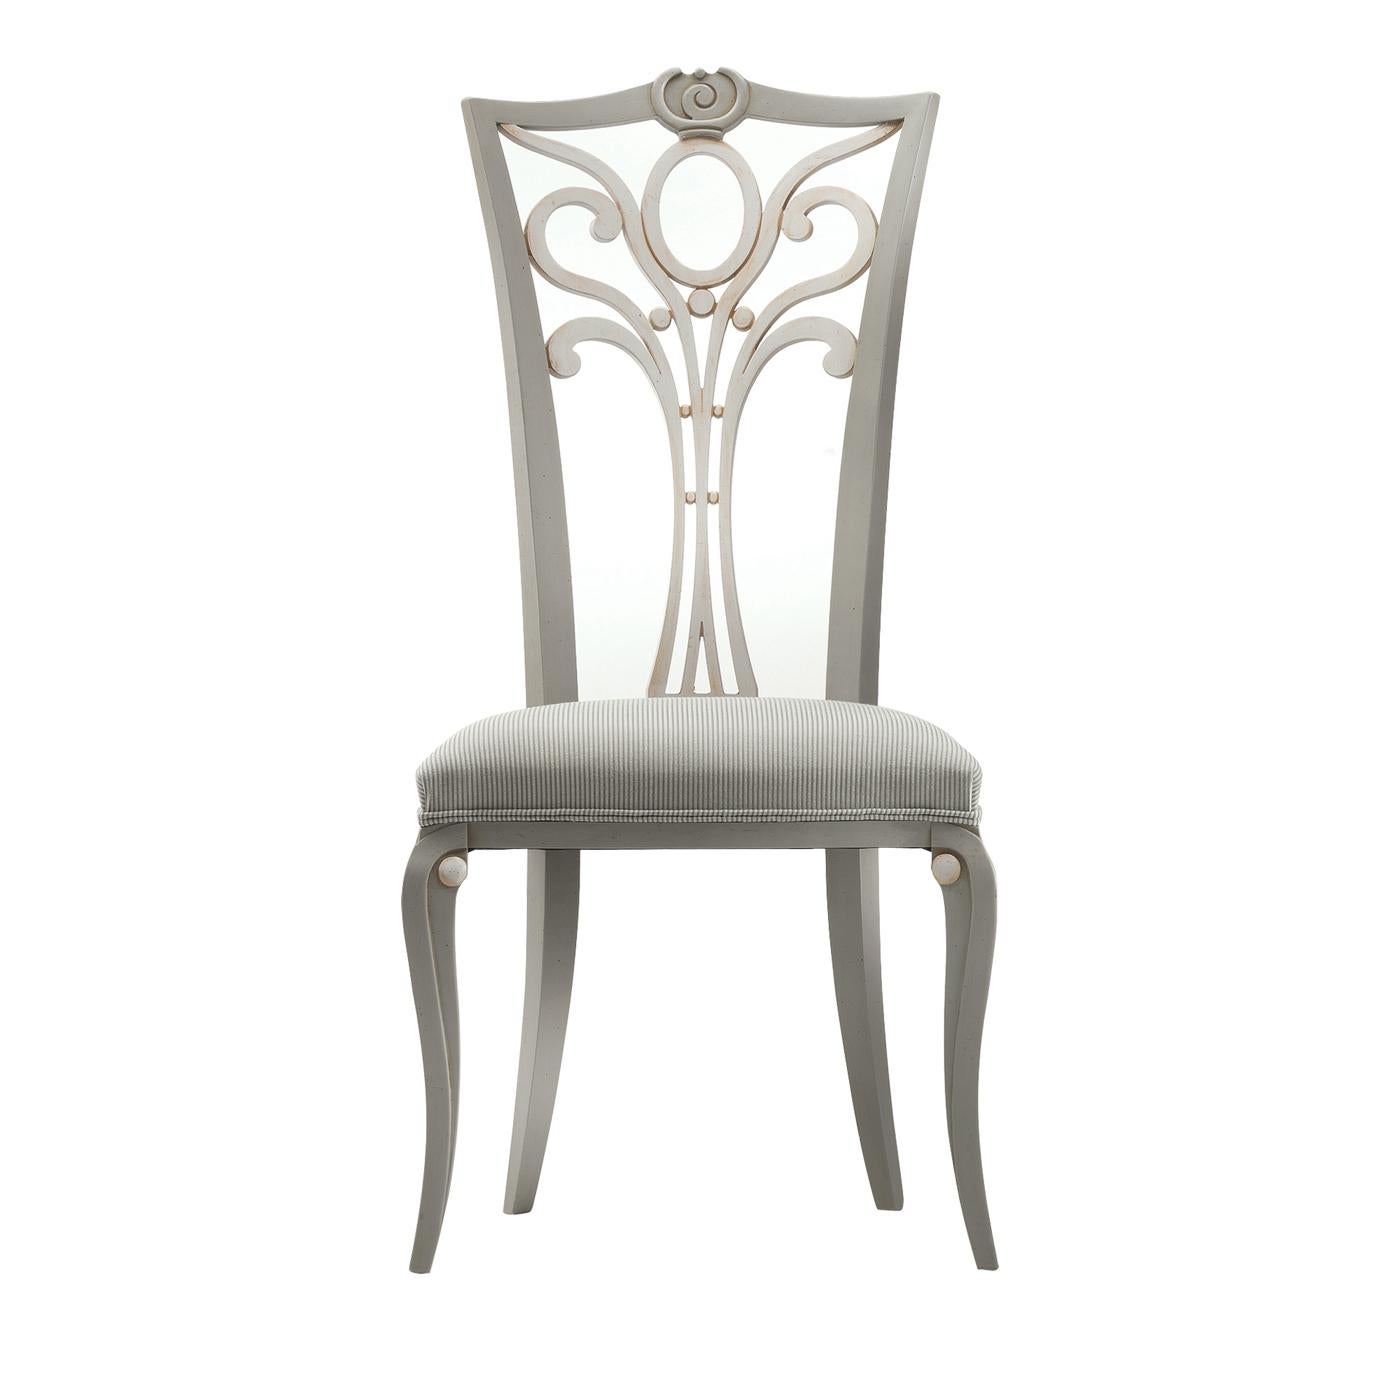 A refined design characterizes the Contemporary chair by Modenese Gastone. The structure is in white wood, while the soft seat is padded and upholstered with matching fabric. The finely decorated backrest makes this chair perfect for giving a touch